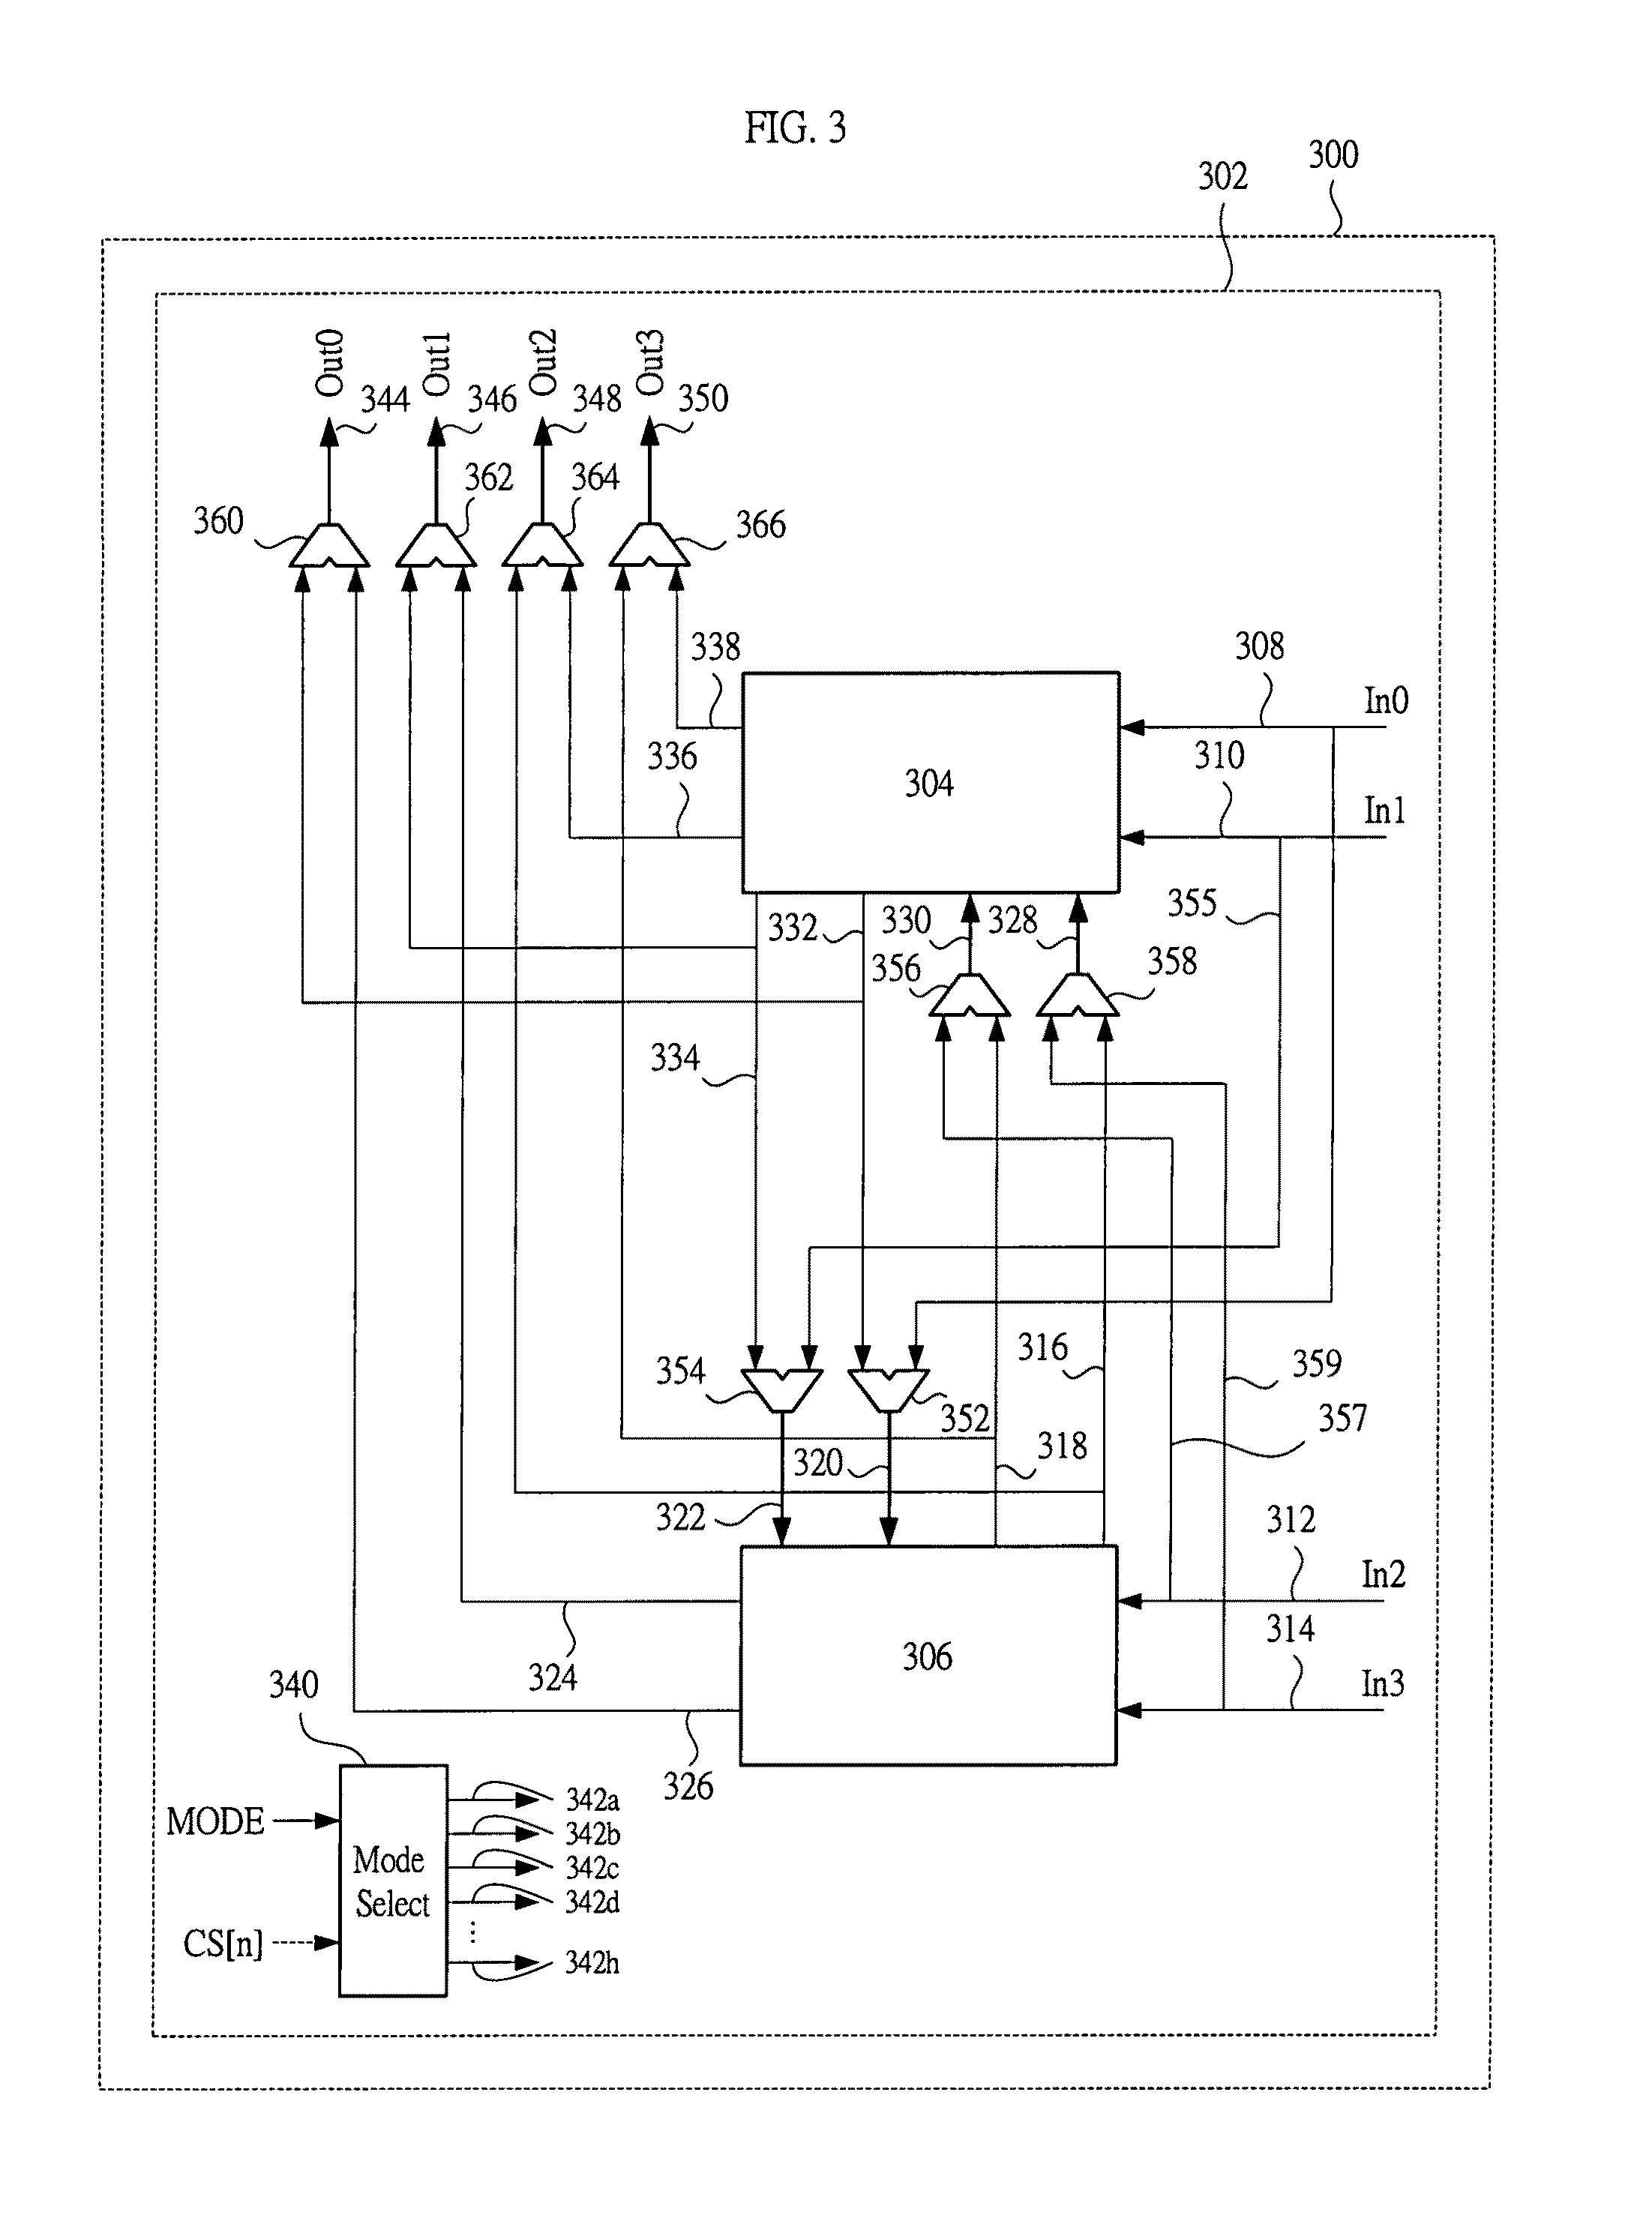 Method and device for scan chain management of dies reused in a multi-chip package